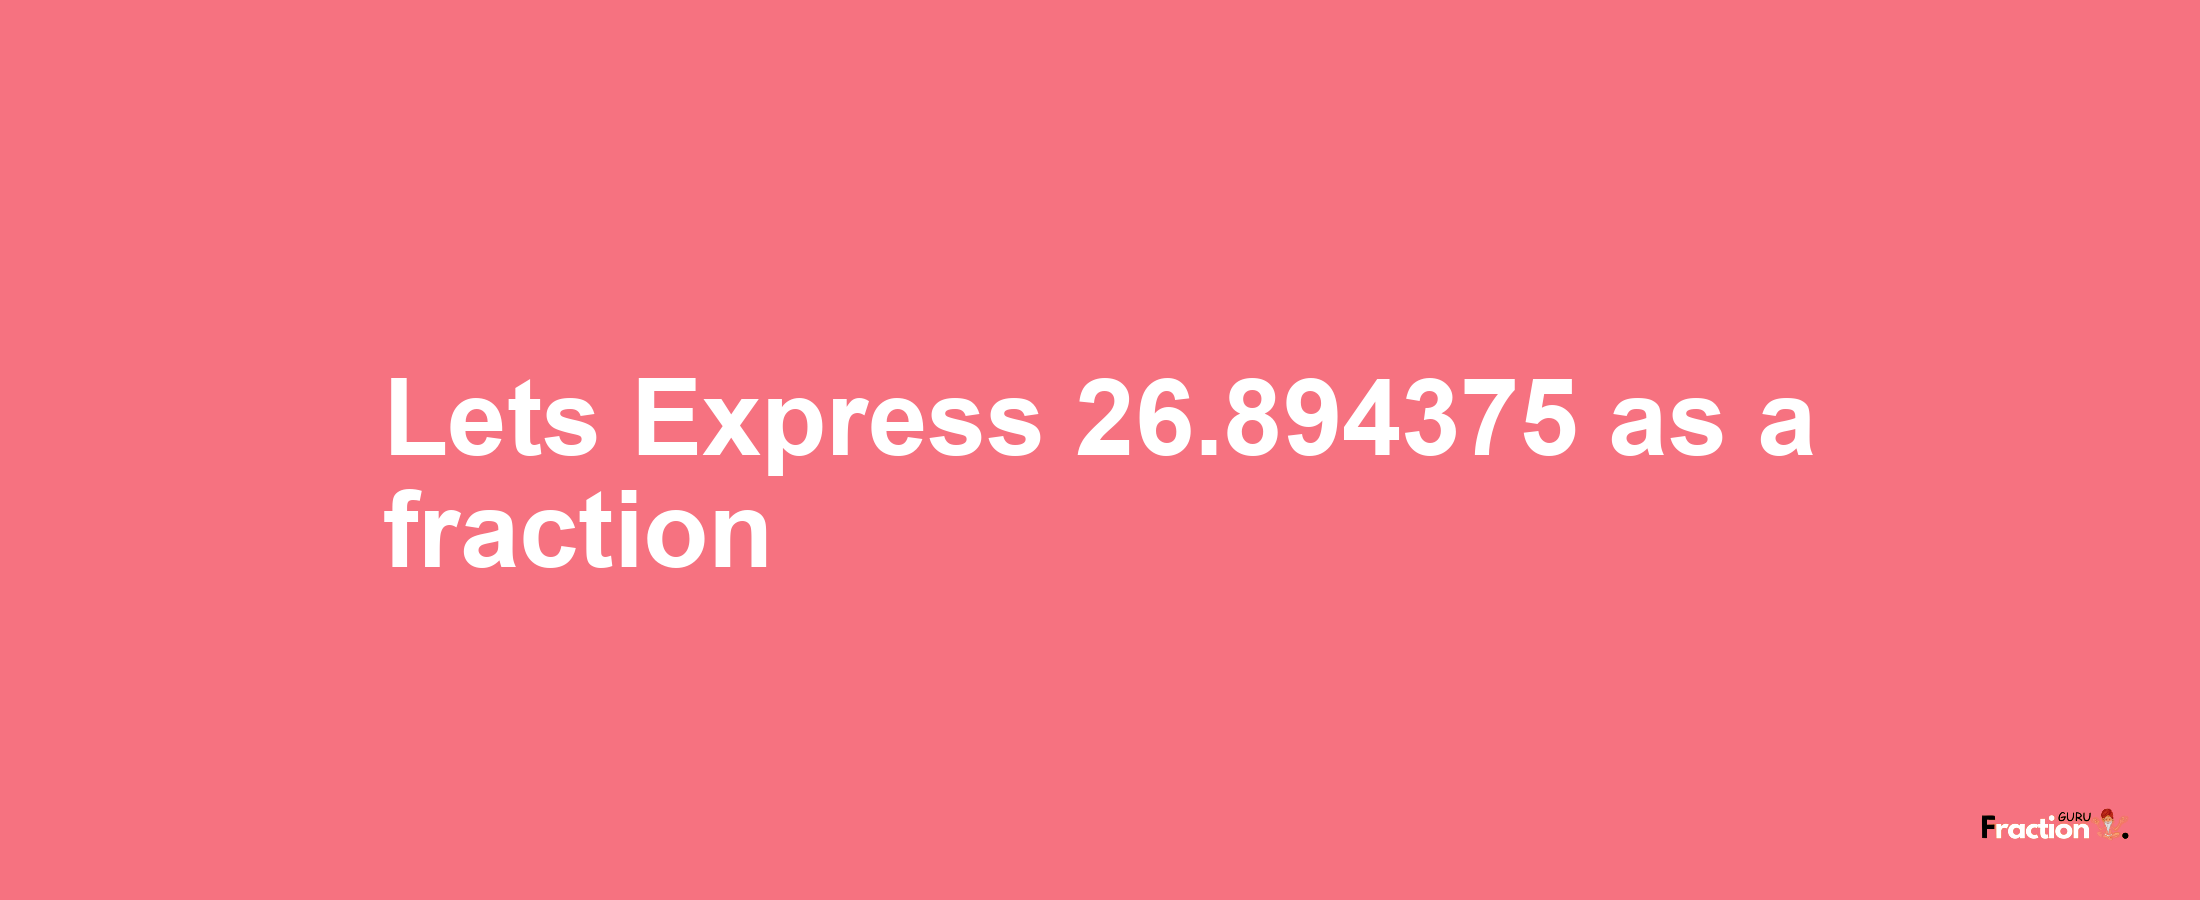 Lets Express 26.894375 as afraction